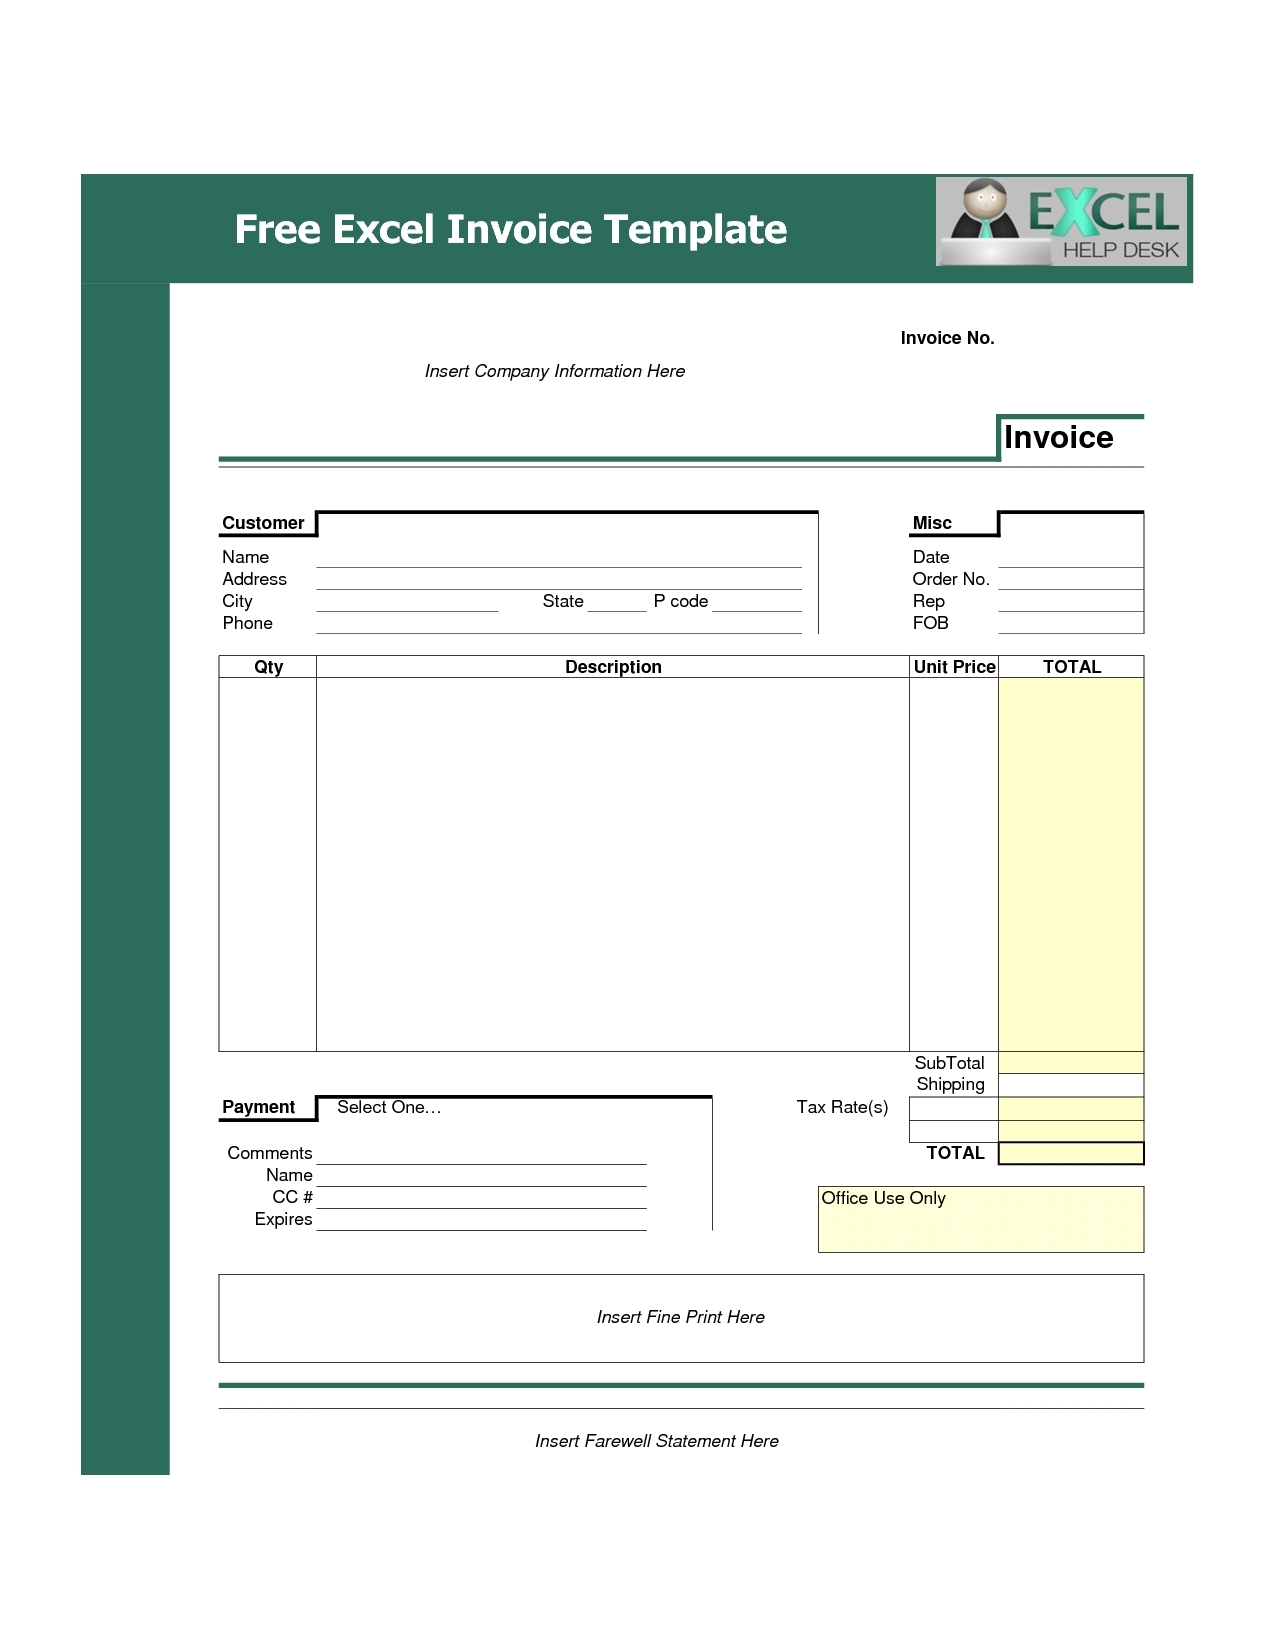 free download tax invoice format in excel invoice template free 2016 invoice format in excel download